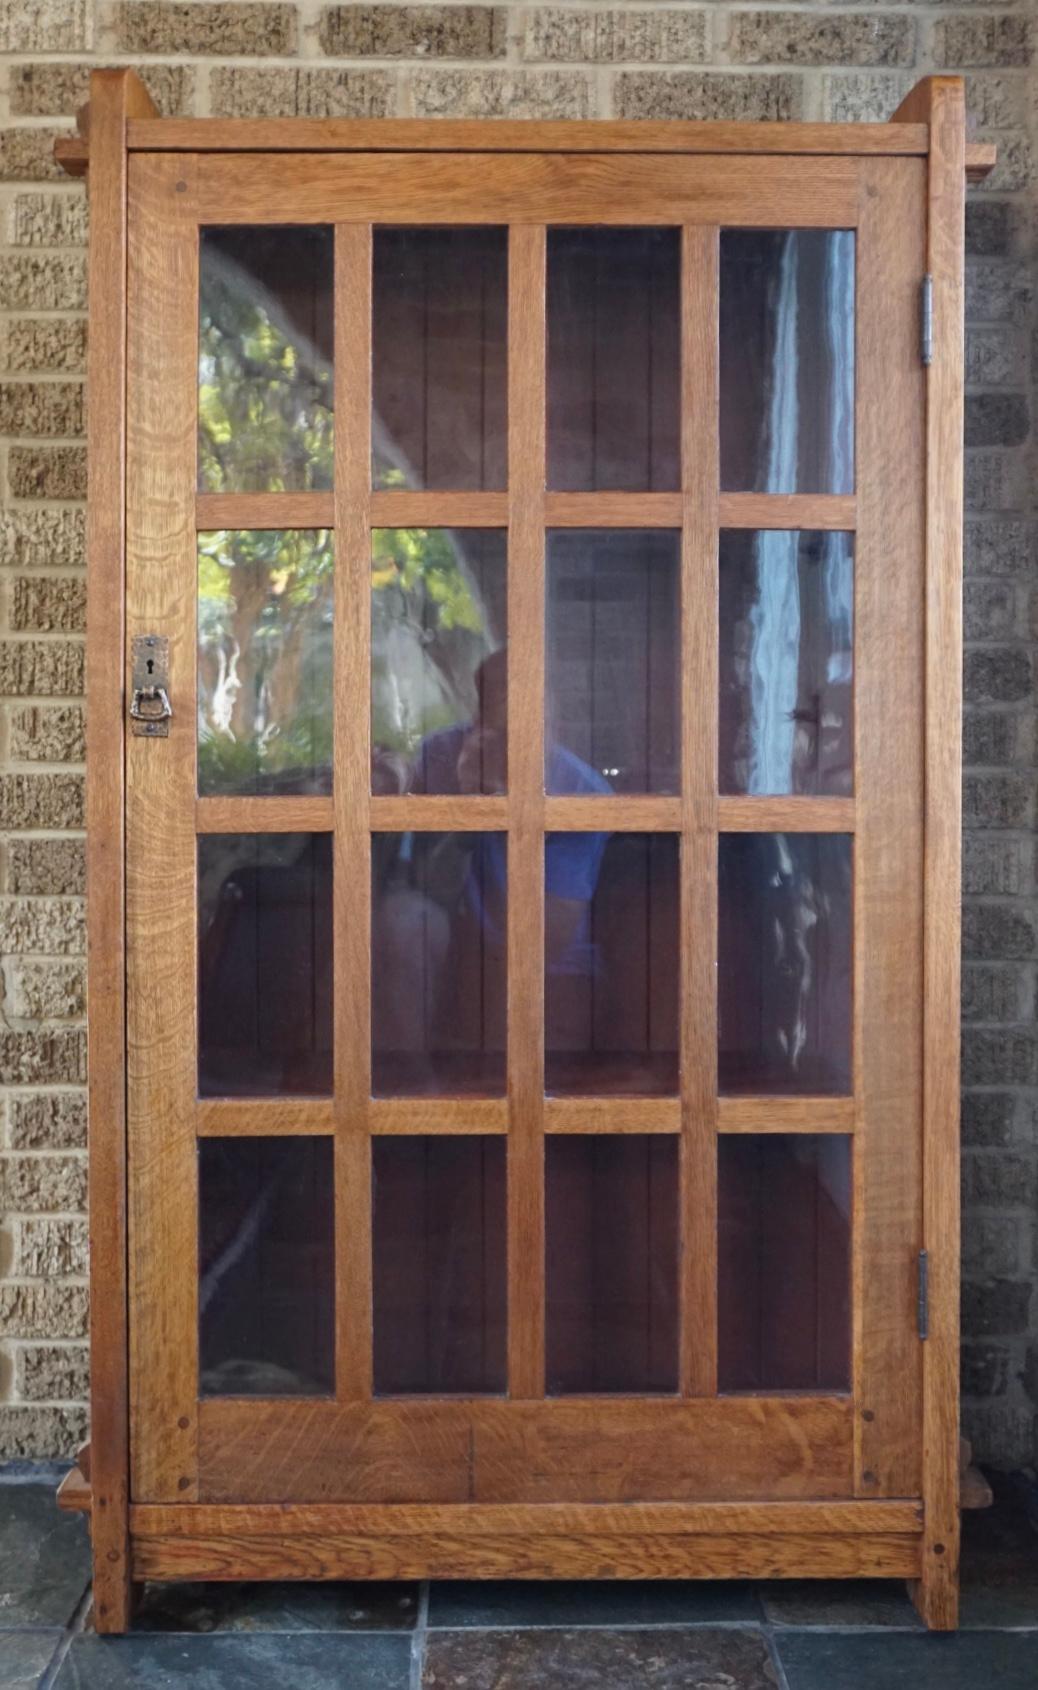 L & LG Stickley Oak Bookcase. Circa 1910
A single 16 pane glass window door bookcase with mortise and tenon oak wood construction is wonderful condition with a beautiful finish ready to complete your arts and crafts  Gustave Stickley